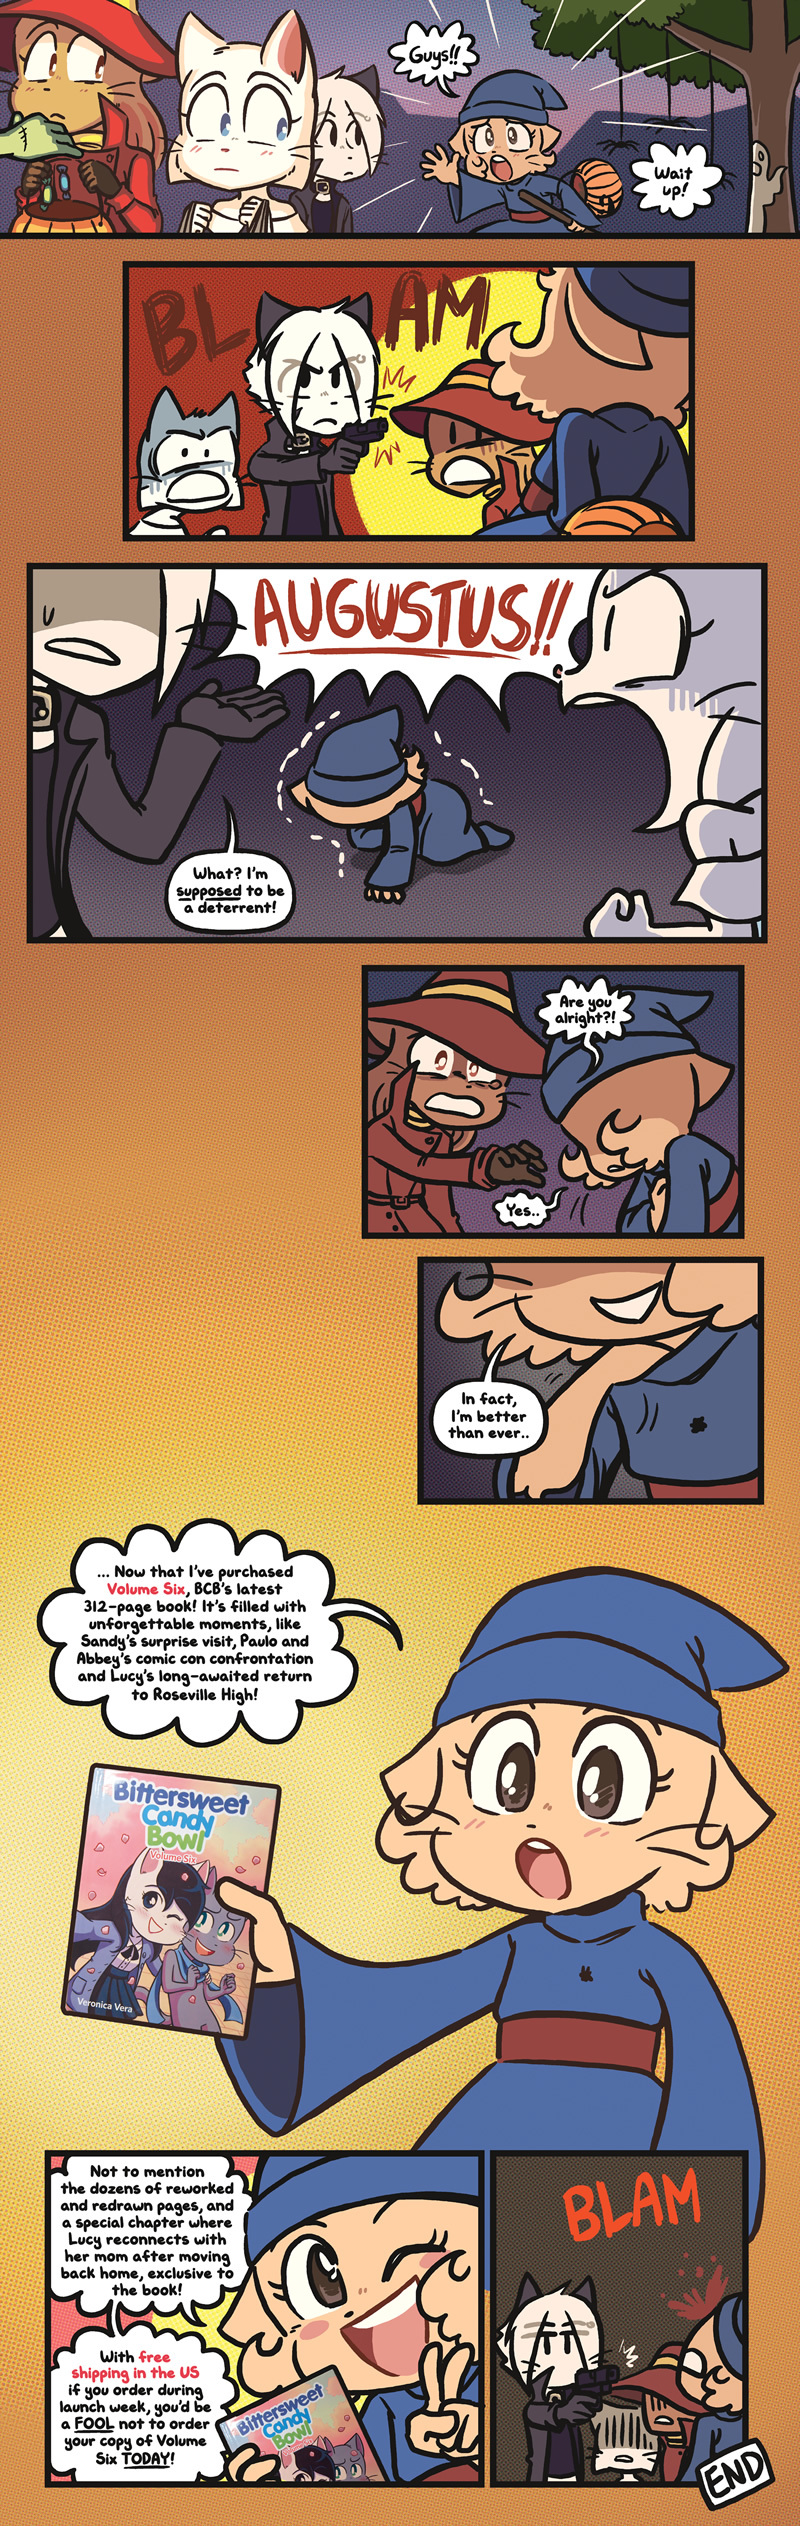 Candybooru image #14122, tagged with Augustus Daisy Lucy Mike Sandy Sue Taeshi_(Artist) comic